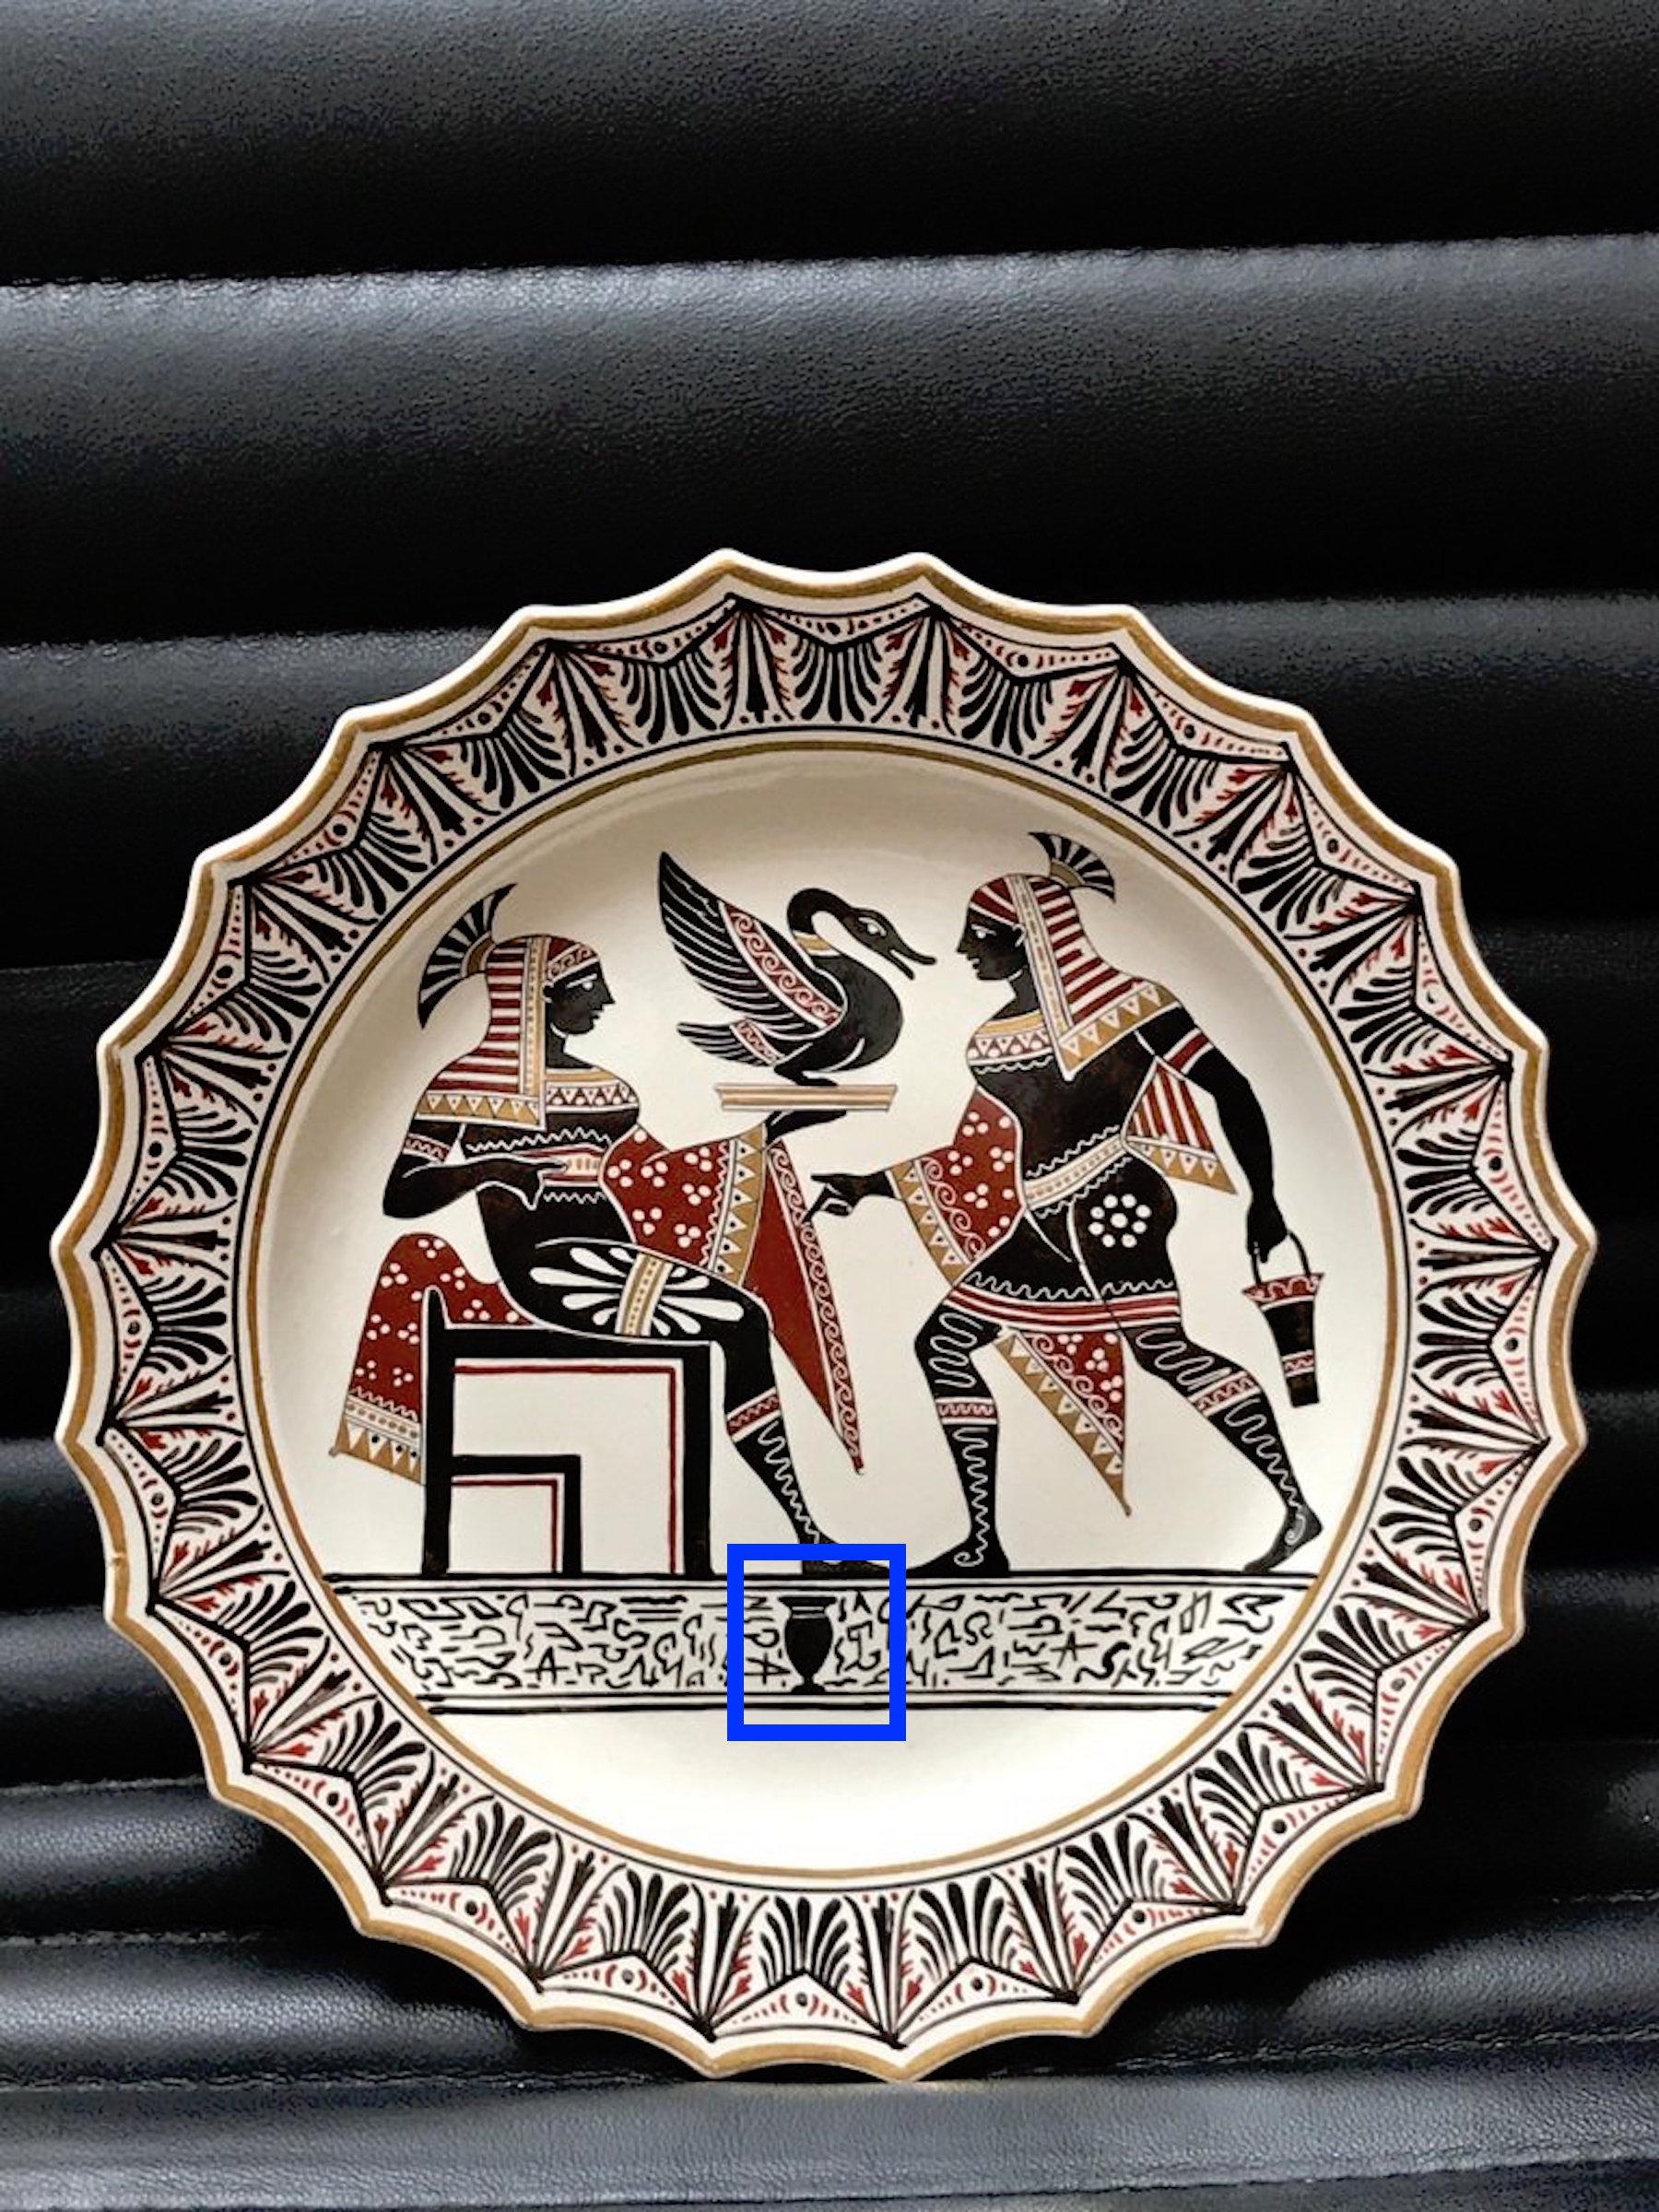 Giustiniani Egyptomania Pottery plate with gilt highlights, and a central urn 
Neapolitan manufacture (Biagio Giustiniani & Sons) dated to 1830-1840, impressed script Giustiniani and other characters.